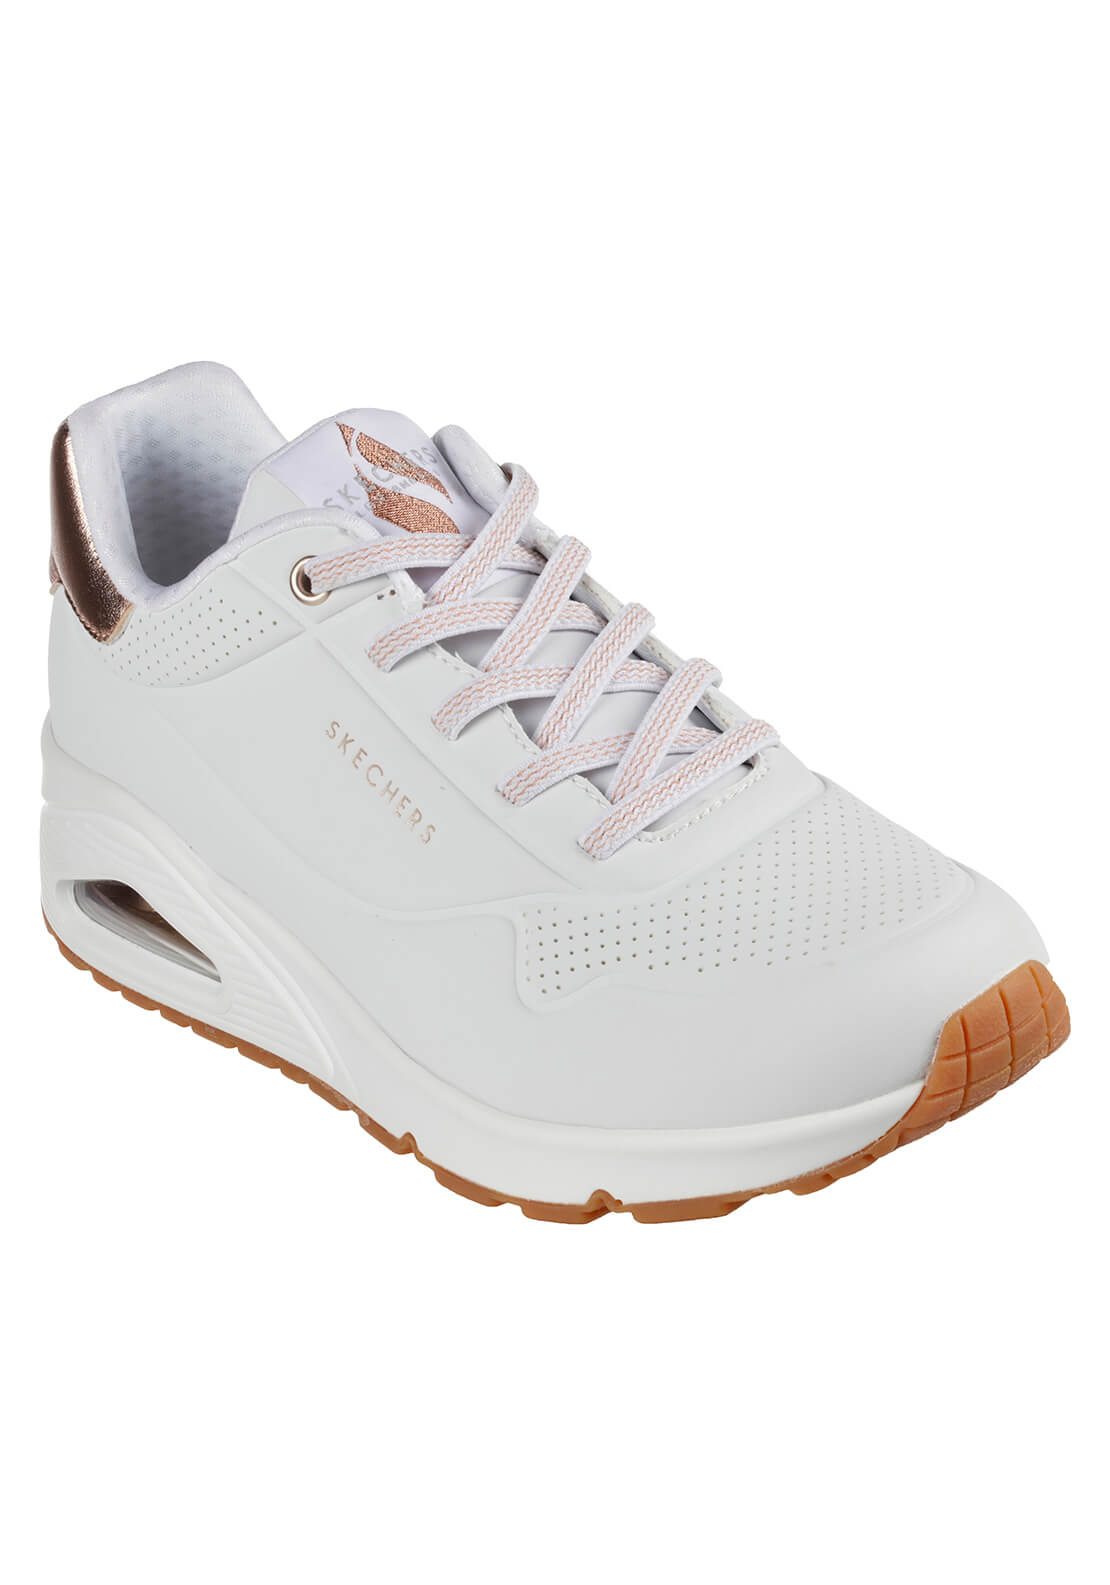 Skechers Street Uno Shimmer Away - White 1 Shaws Department Stores